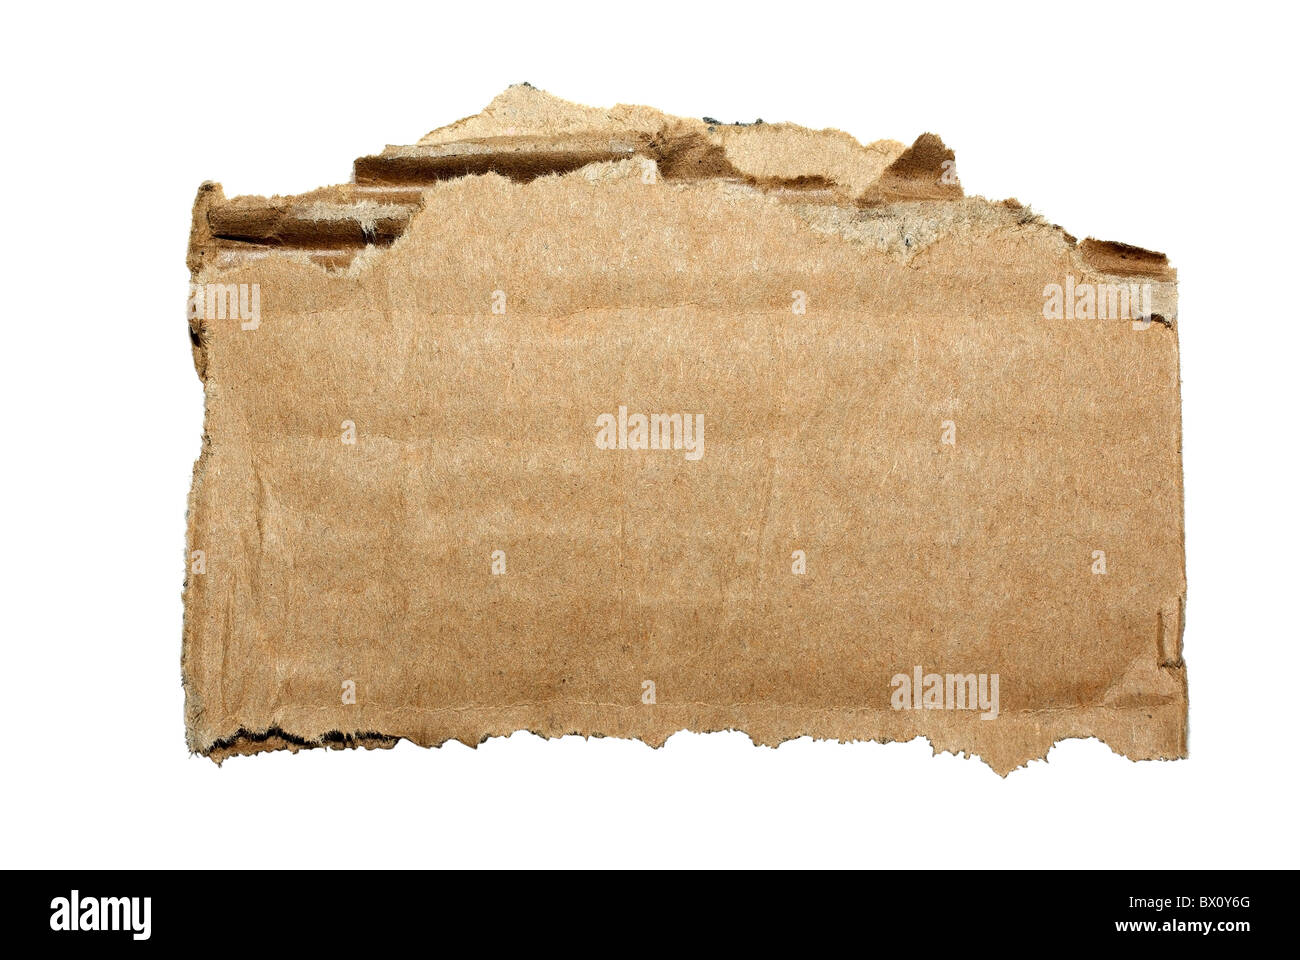 Cardboard part isolated on the white background. Stock Photo